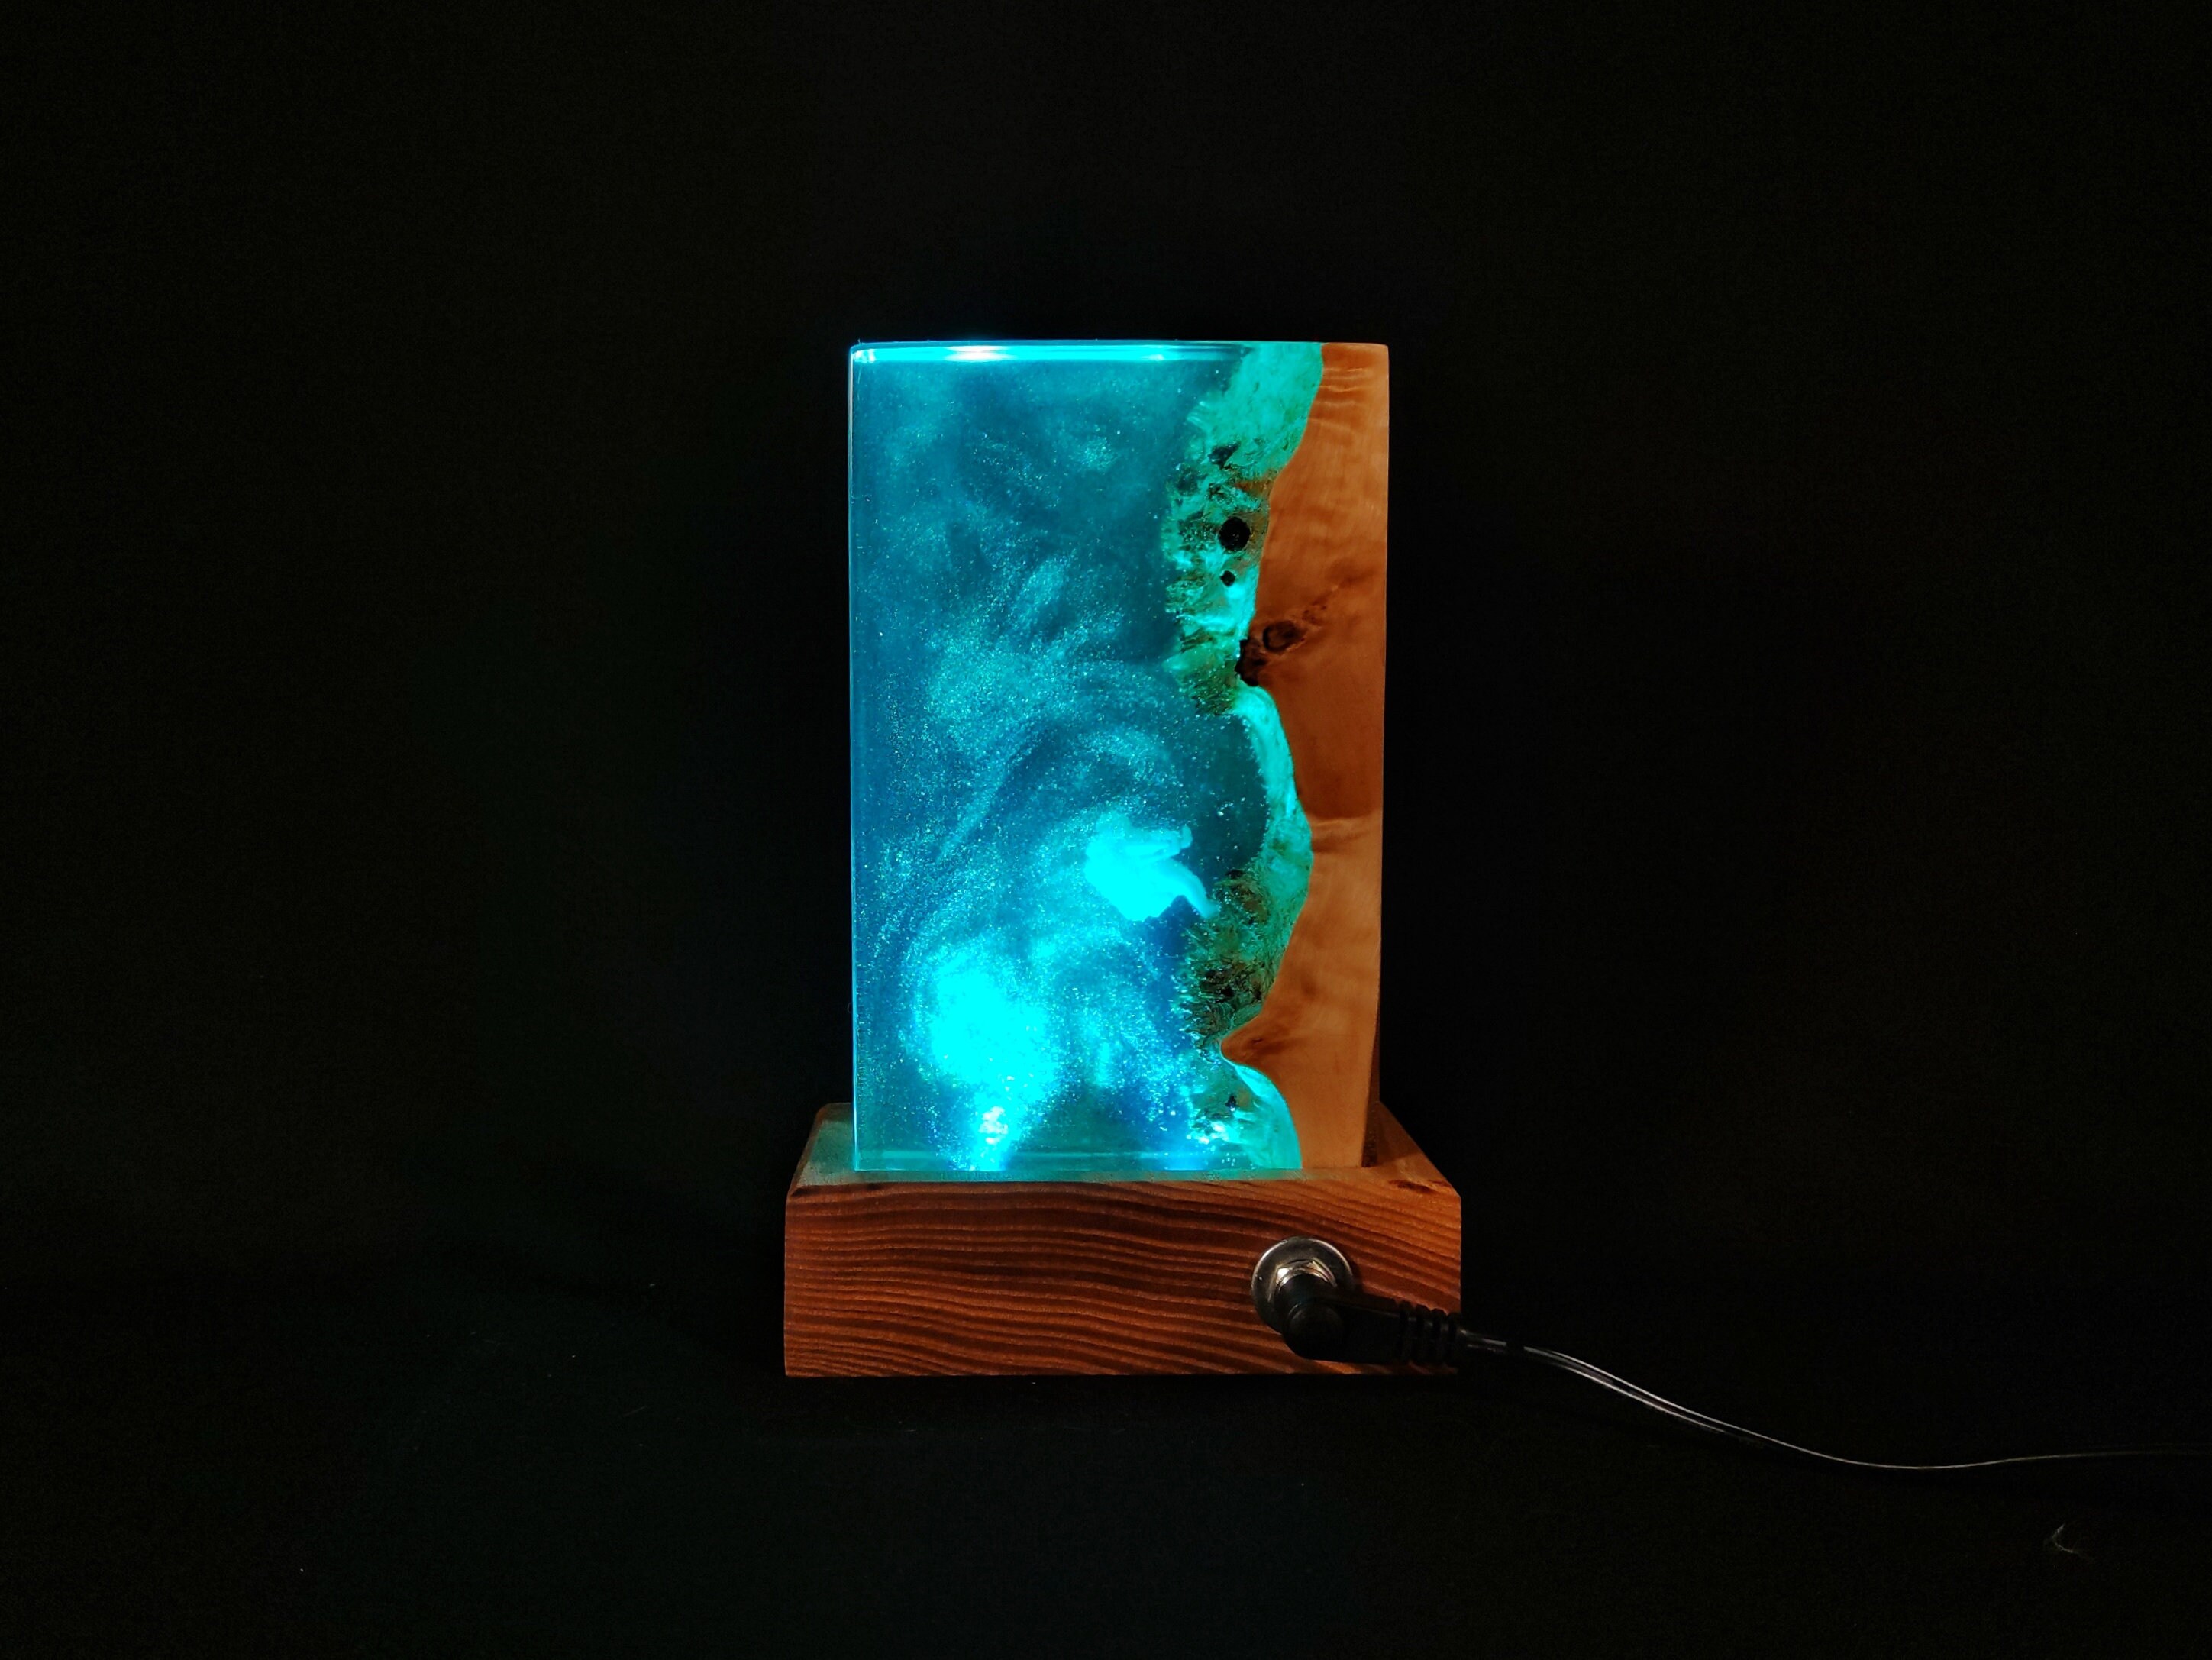 Space epoxy lamp Table resin lamp Resin wood lamp Led | Etsy